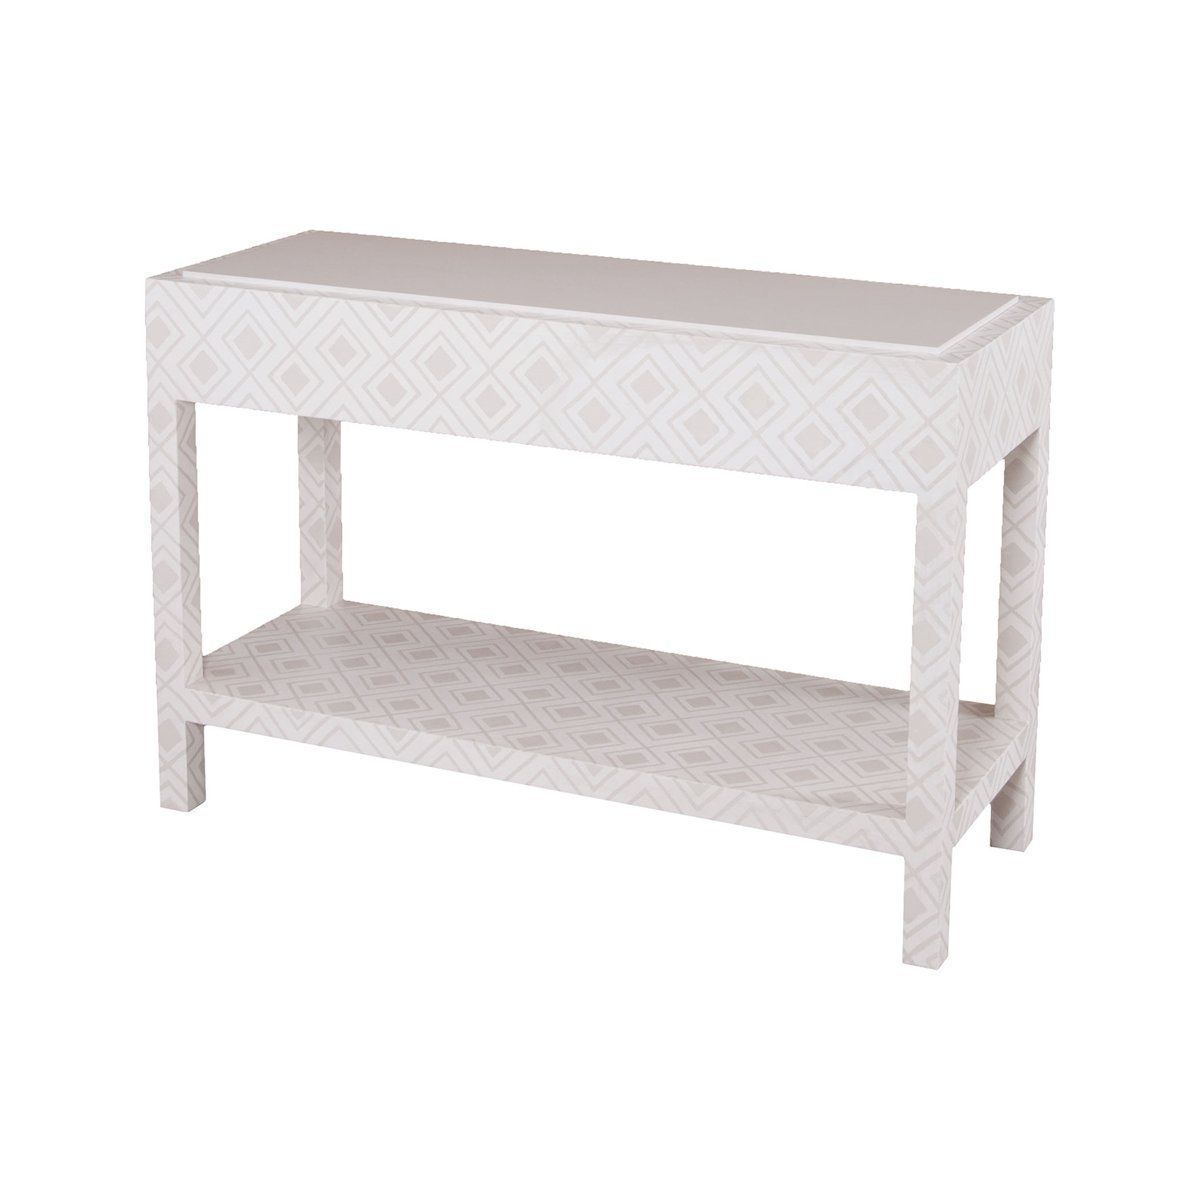 Kent Fabric Wrapped Console | Products In 2018 | Pinterest Pertaining To Parsons White Marble Top &amp; Brass Base 48x16 Console Tables (View 27 of 30)